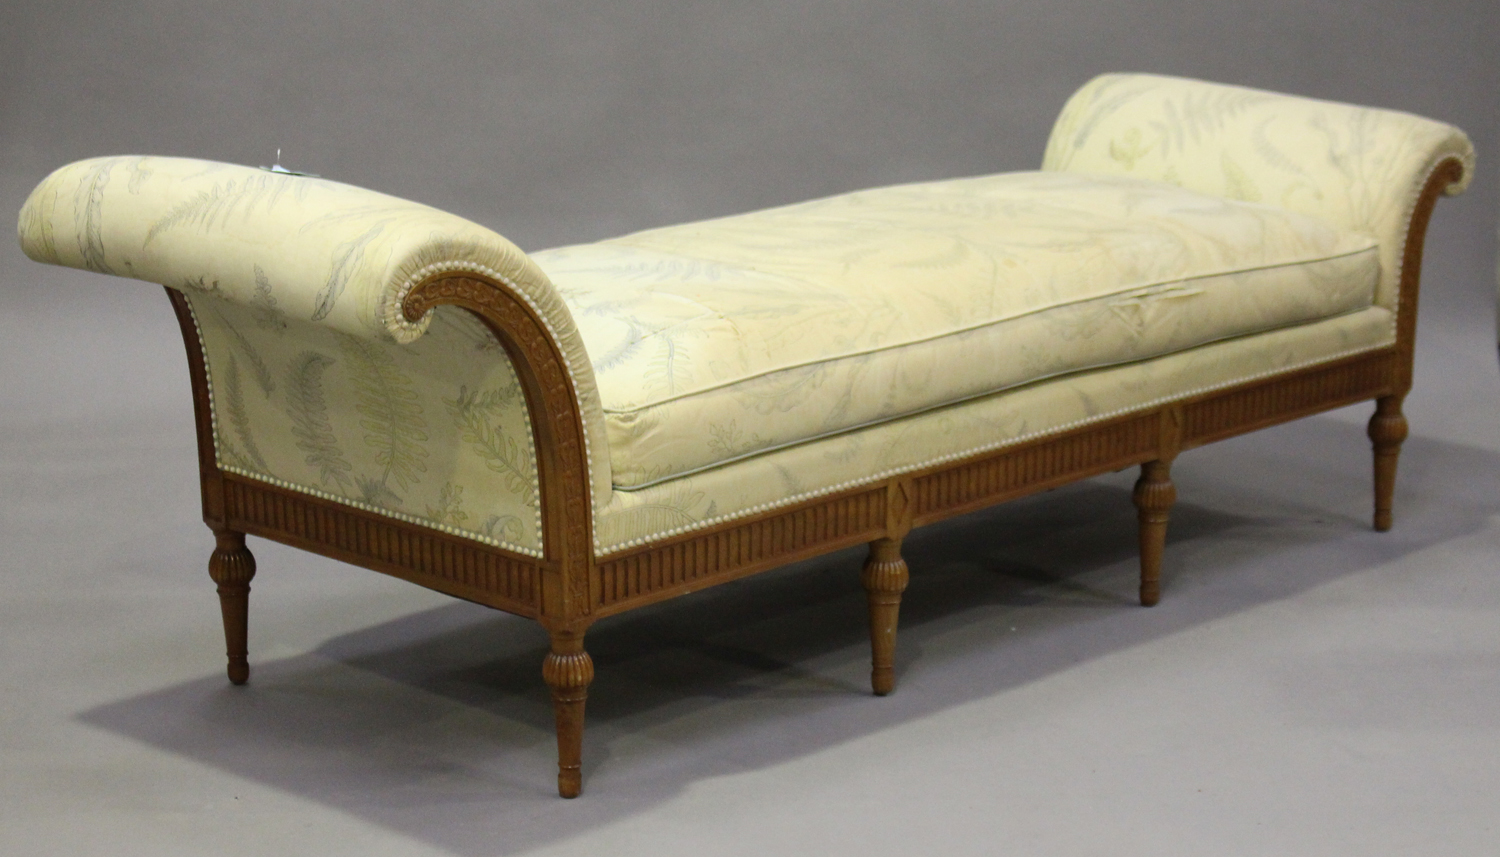 A 20th century Louis XVI style walnut day bed with carved decoration, upholstered in floral